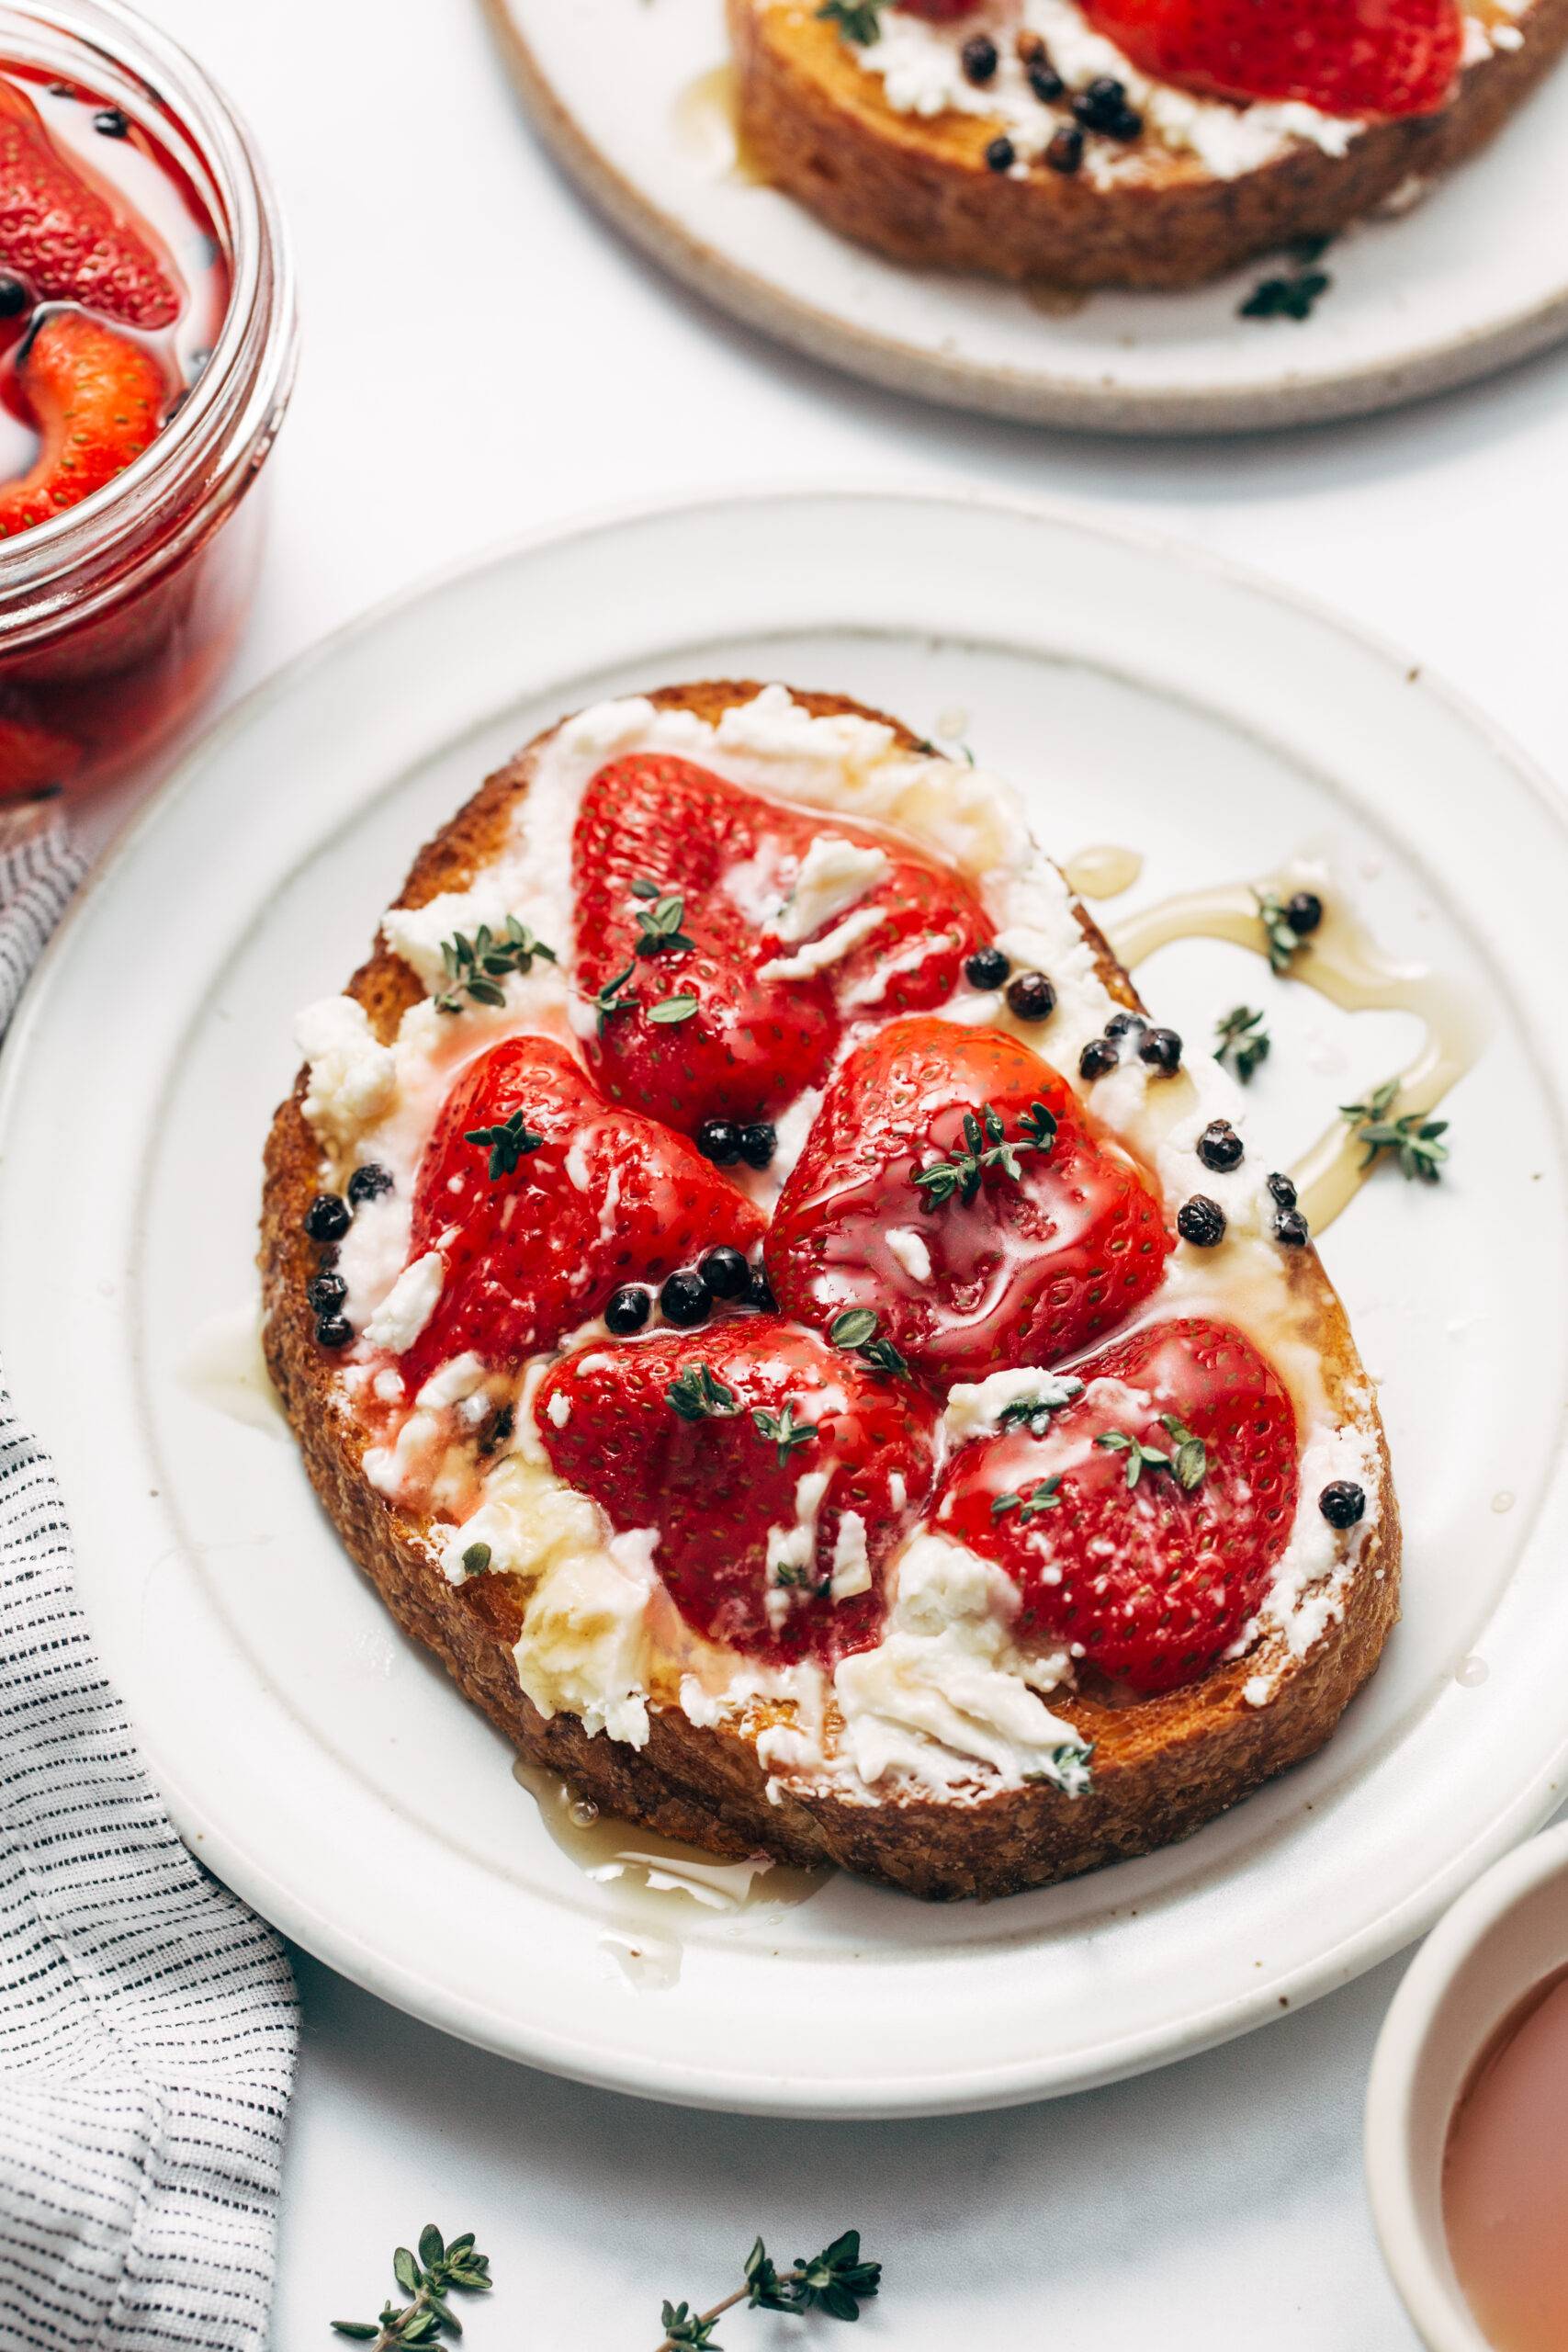 Pickled strawberries on toasts